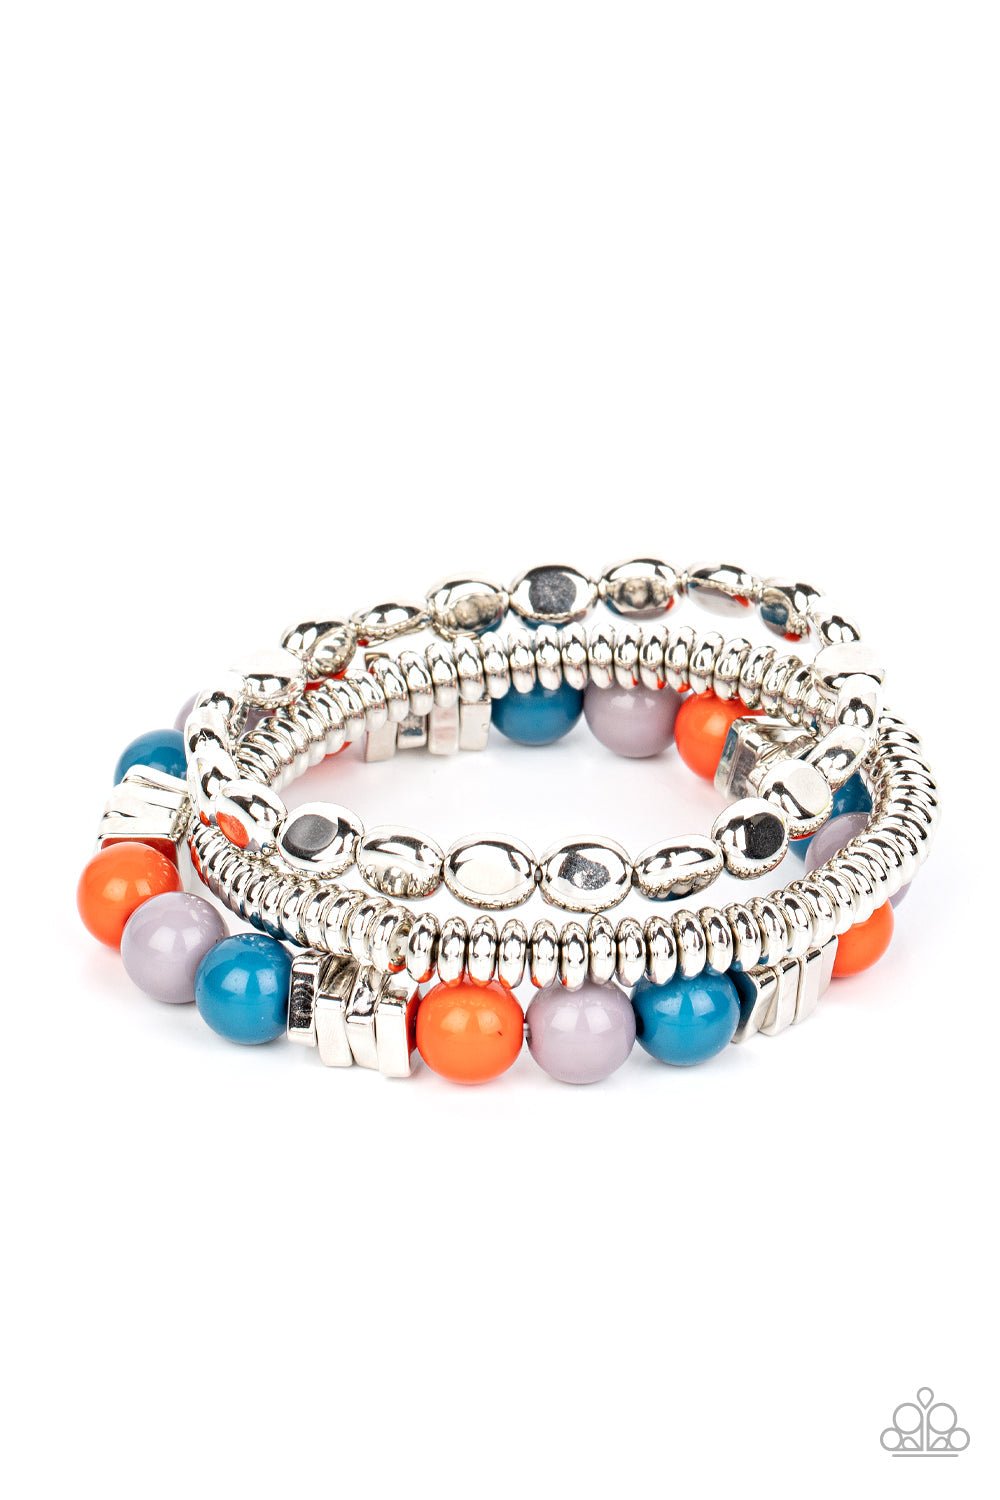 ​Tour de Tourist Silver Stretchy Bracelets - Paparazzi Accessories - collection of silver discs, silver cubes, bubbly multicolored acrylic, and silver pebble-like beads that are colorful with orange, blue and gray. Threaded along stretchy bands around the wrist, creating fiery layers. Sold as one set of three bracelets.